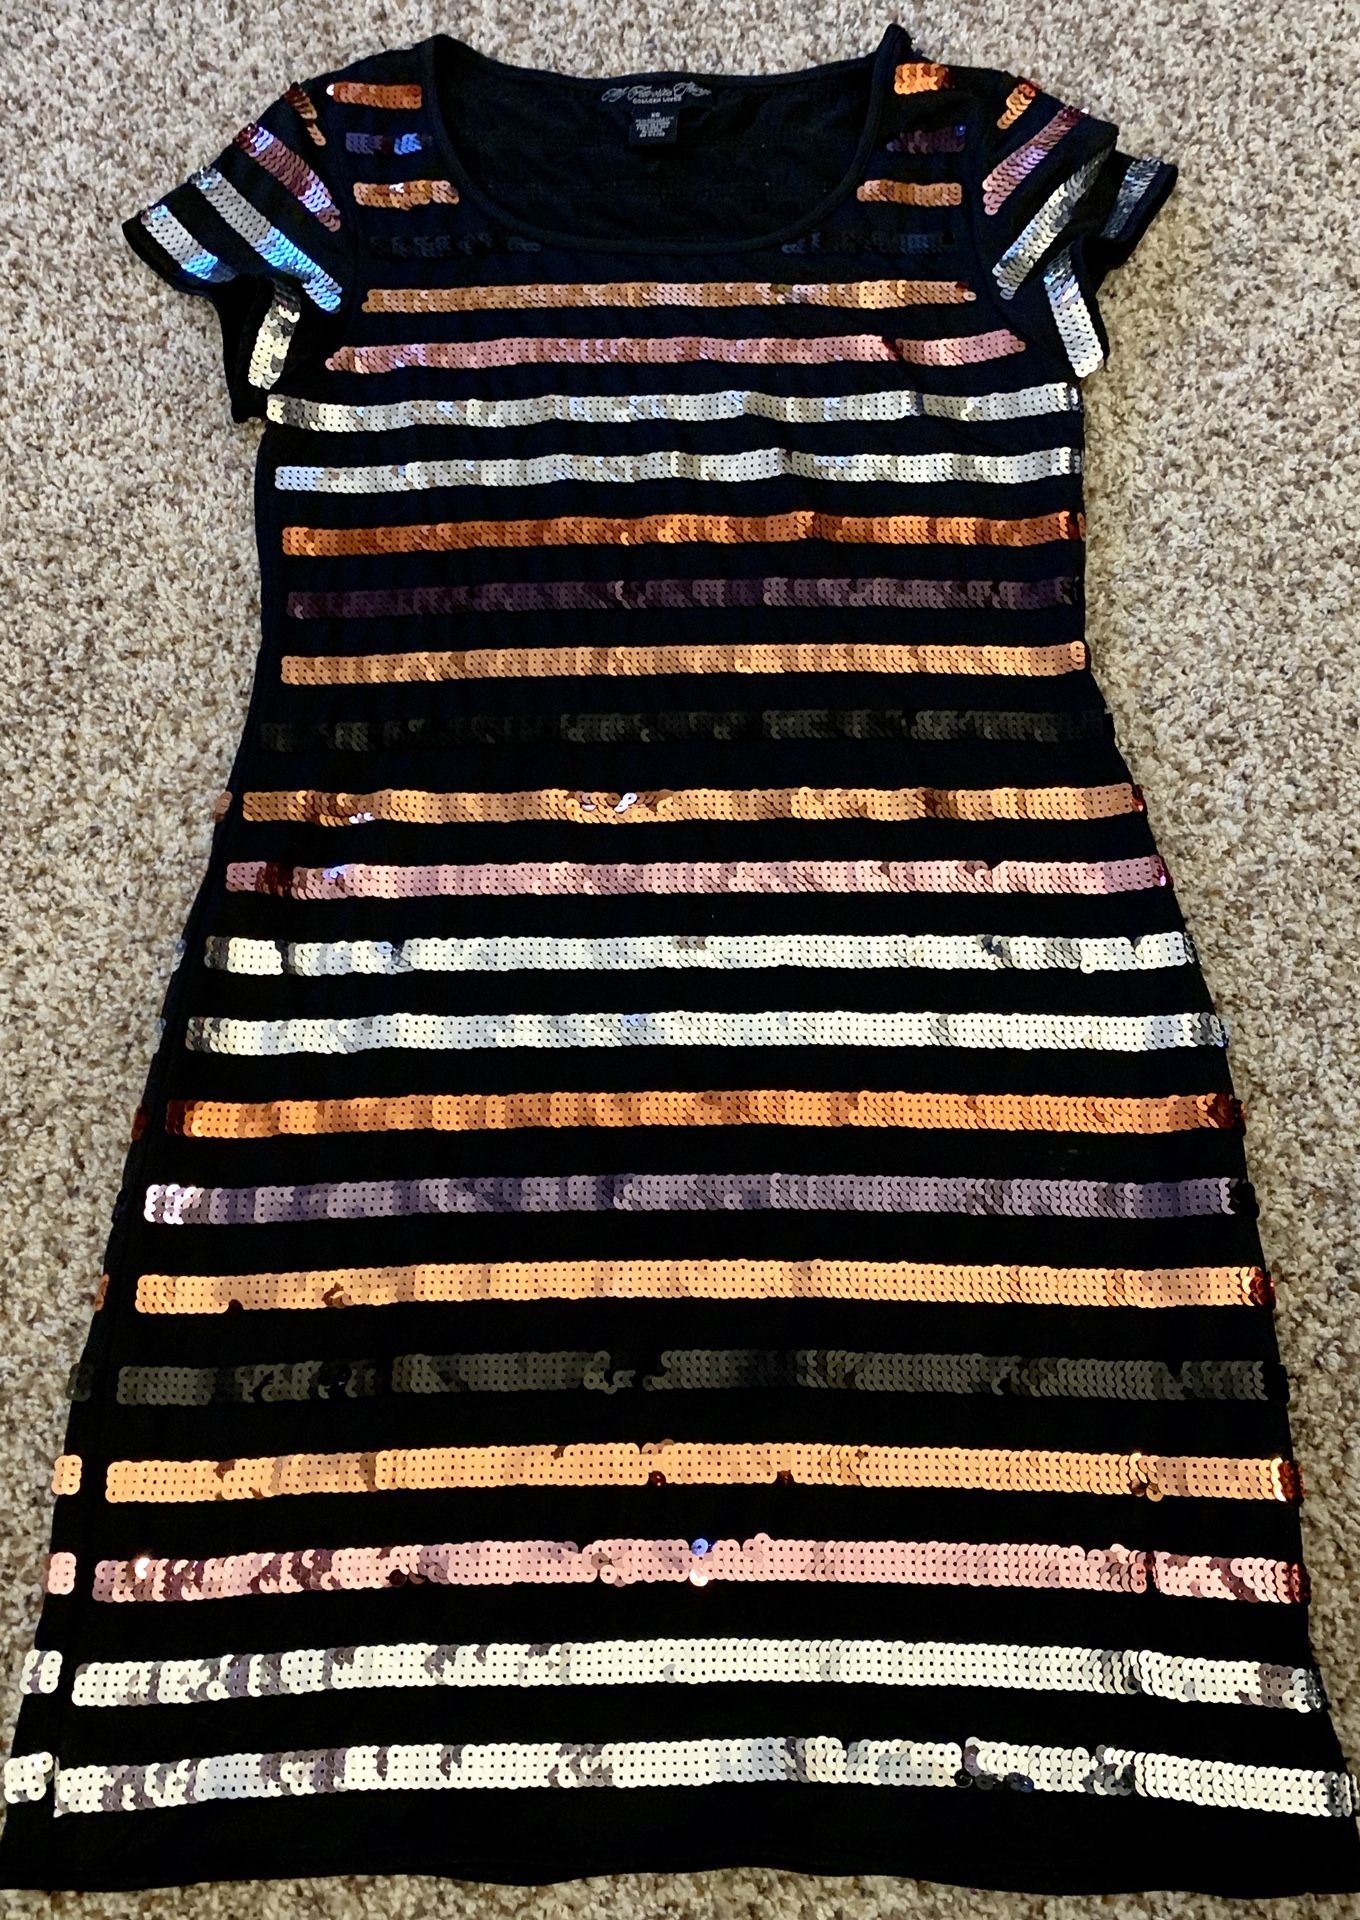 Colleen Lopez My Favorite Things Sequin Dress Size XS